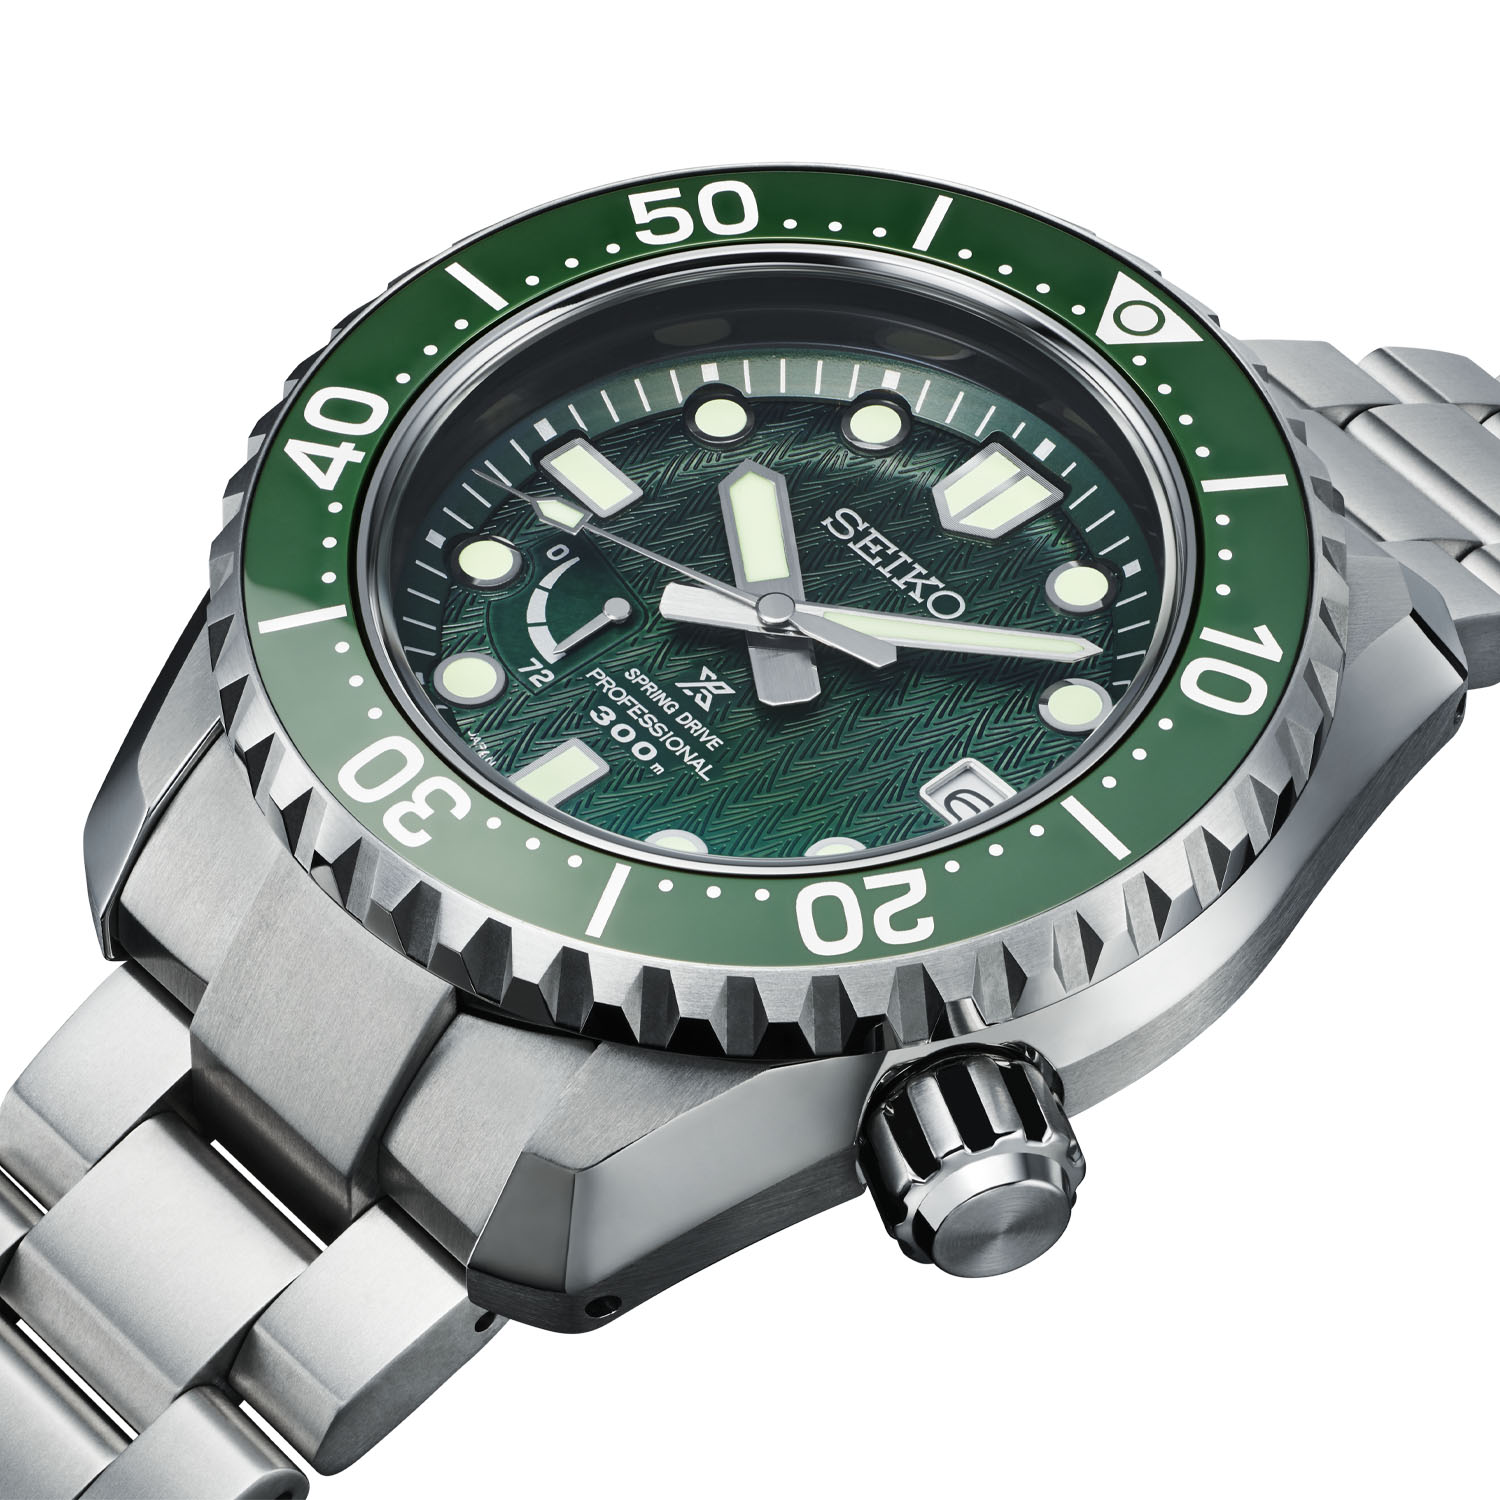 Introducing The Seiko Prospex LX Line Limited Edition SNR045 Watch